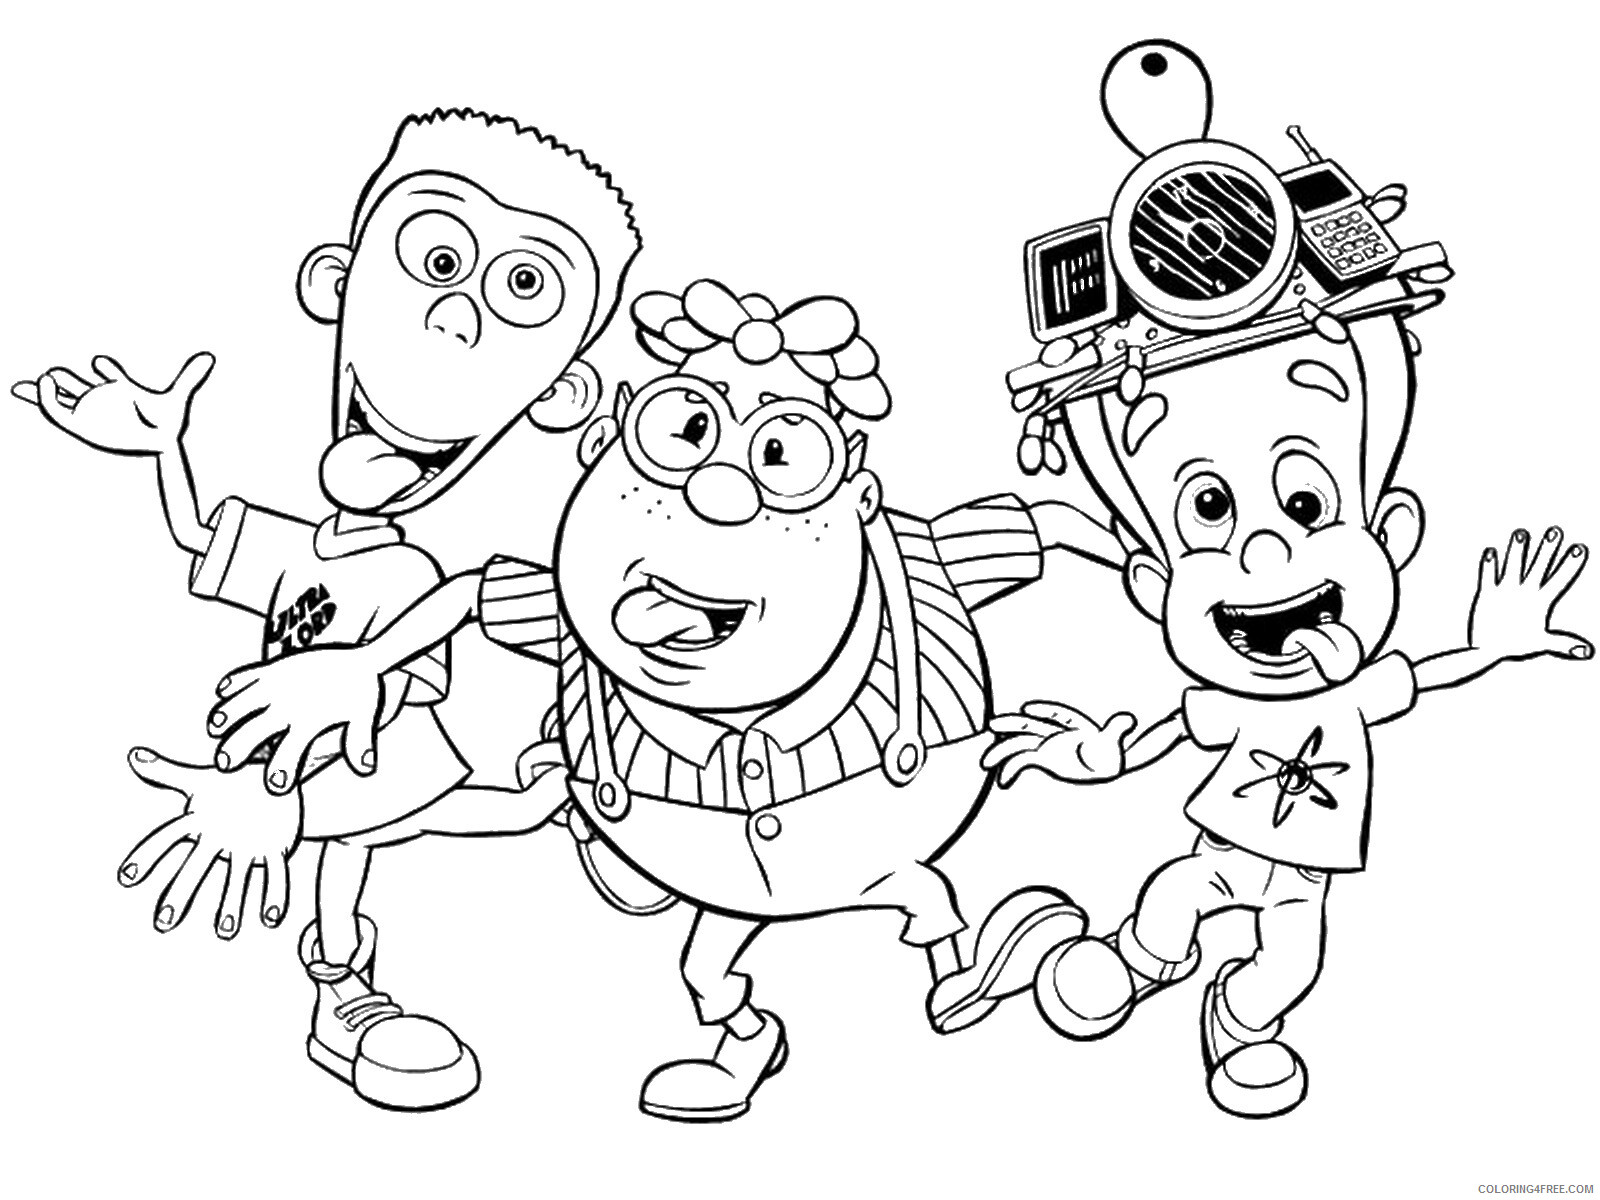 Jimmy Neutron Coloring Pages TV Film jimmy_neutron_cl33 Printable 2020 04144 Coloring4free